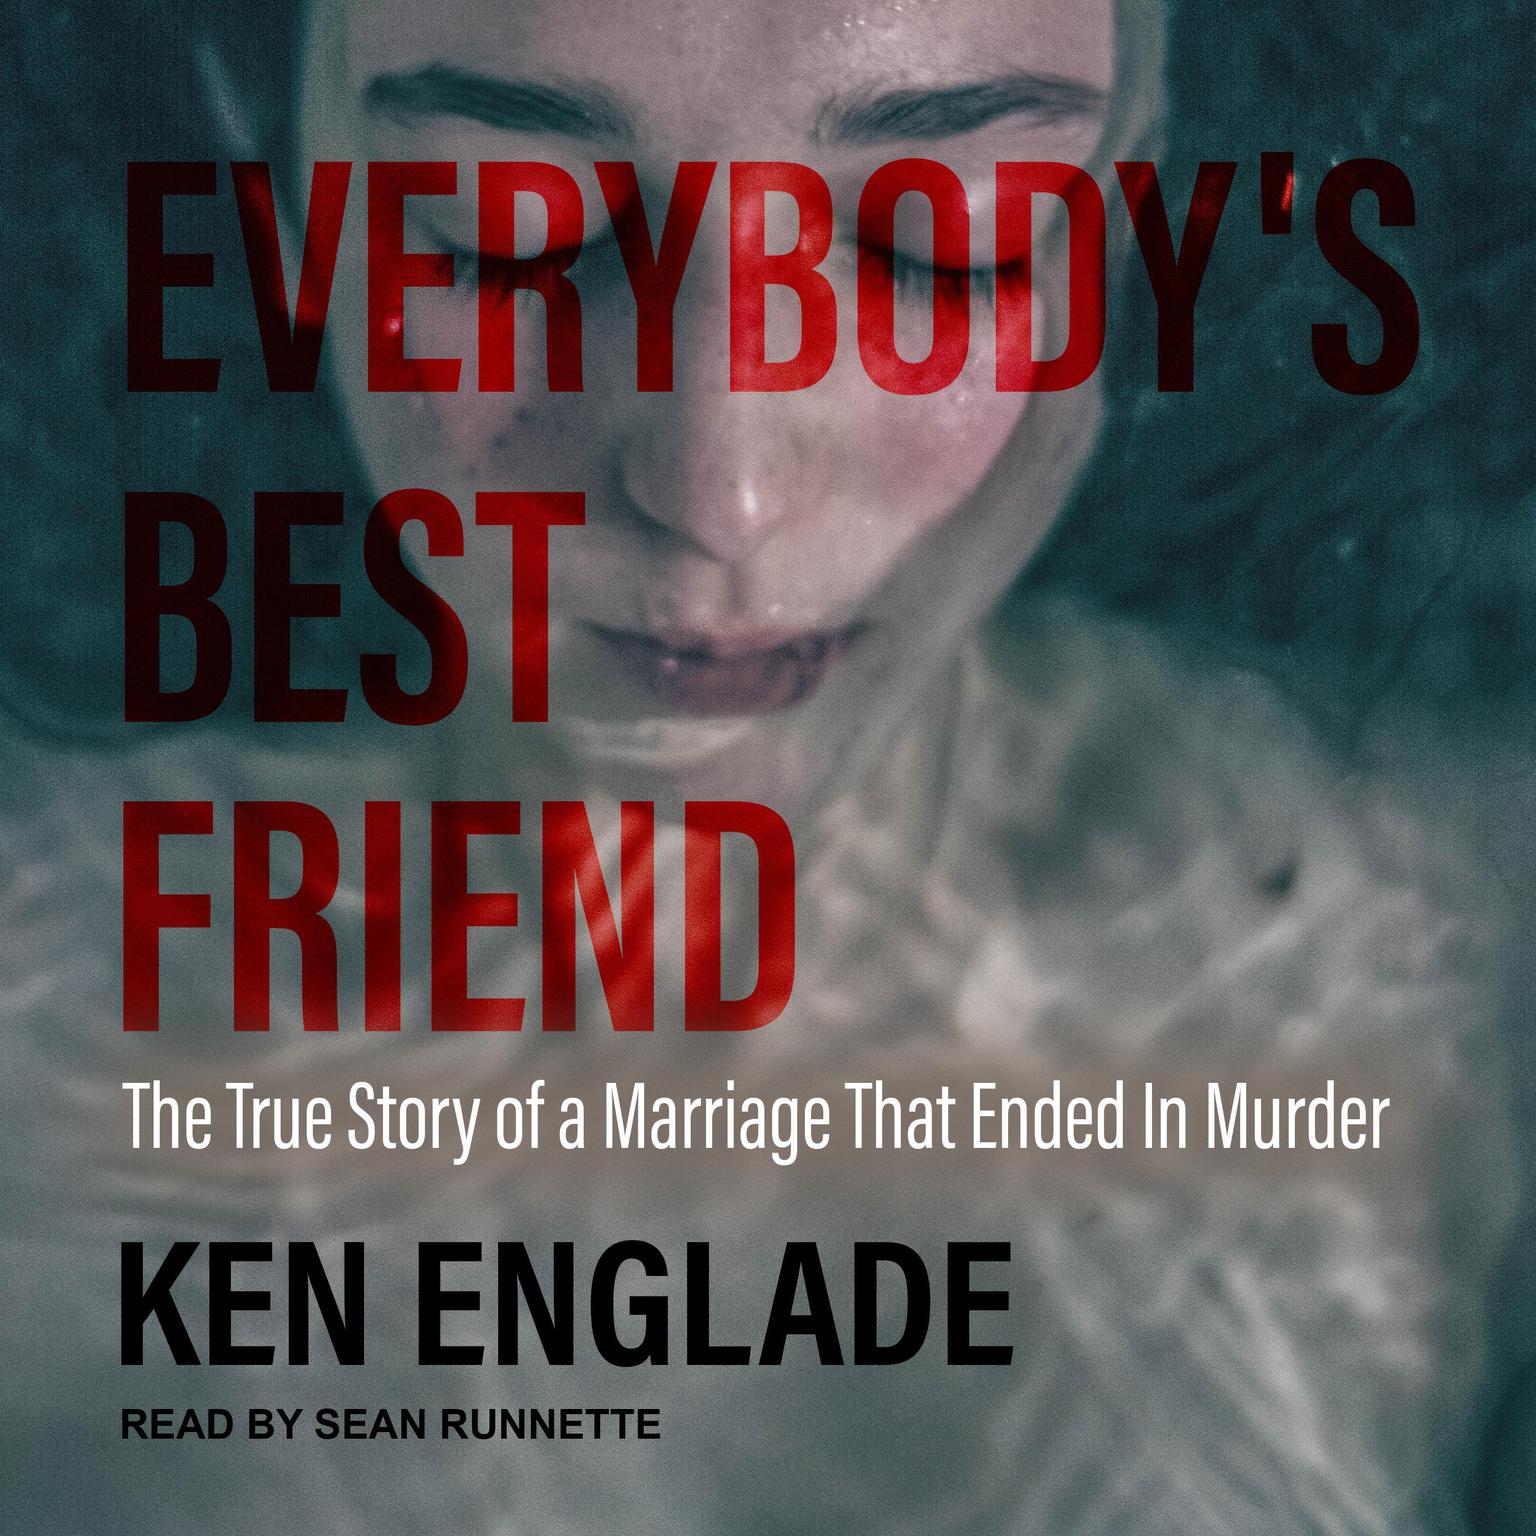 Everybodys Best Friend: The True Story of a Marriage That Ended In Murder Audiobook, by Ken Englade